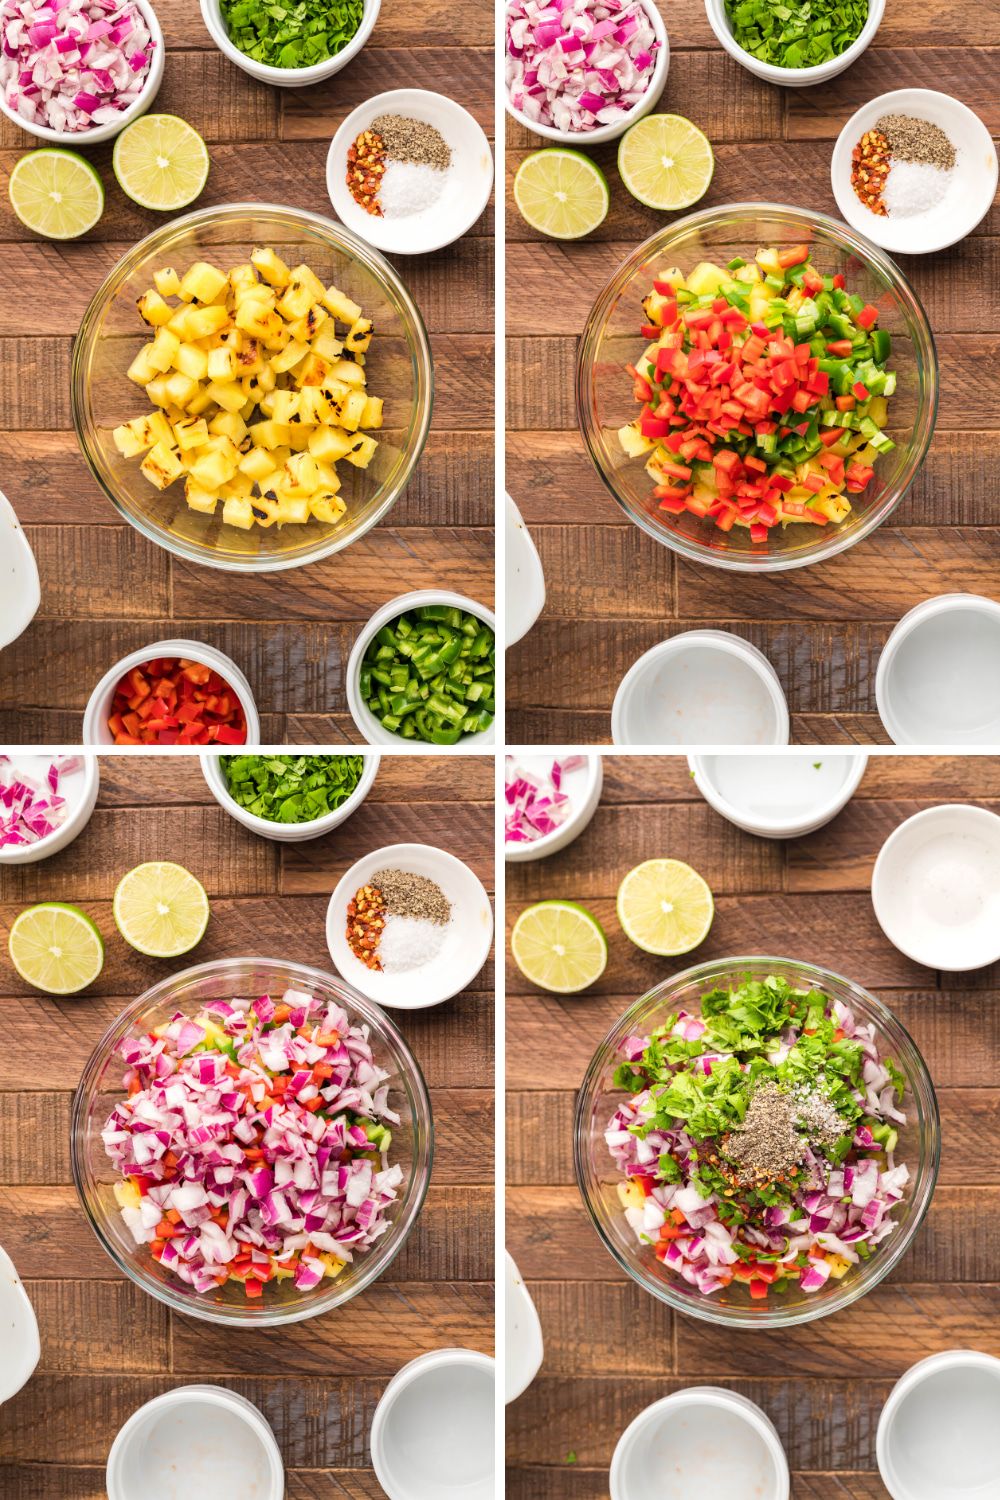 Steps for making pineapple salsa including grilled pineapple, lime juice, red peppers, serrano peppers, and cilantro.